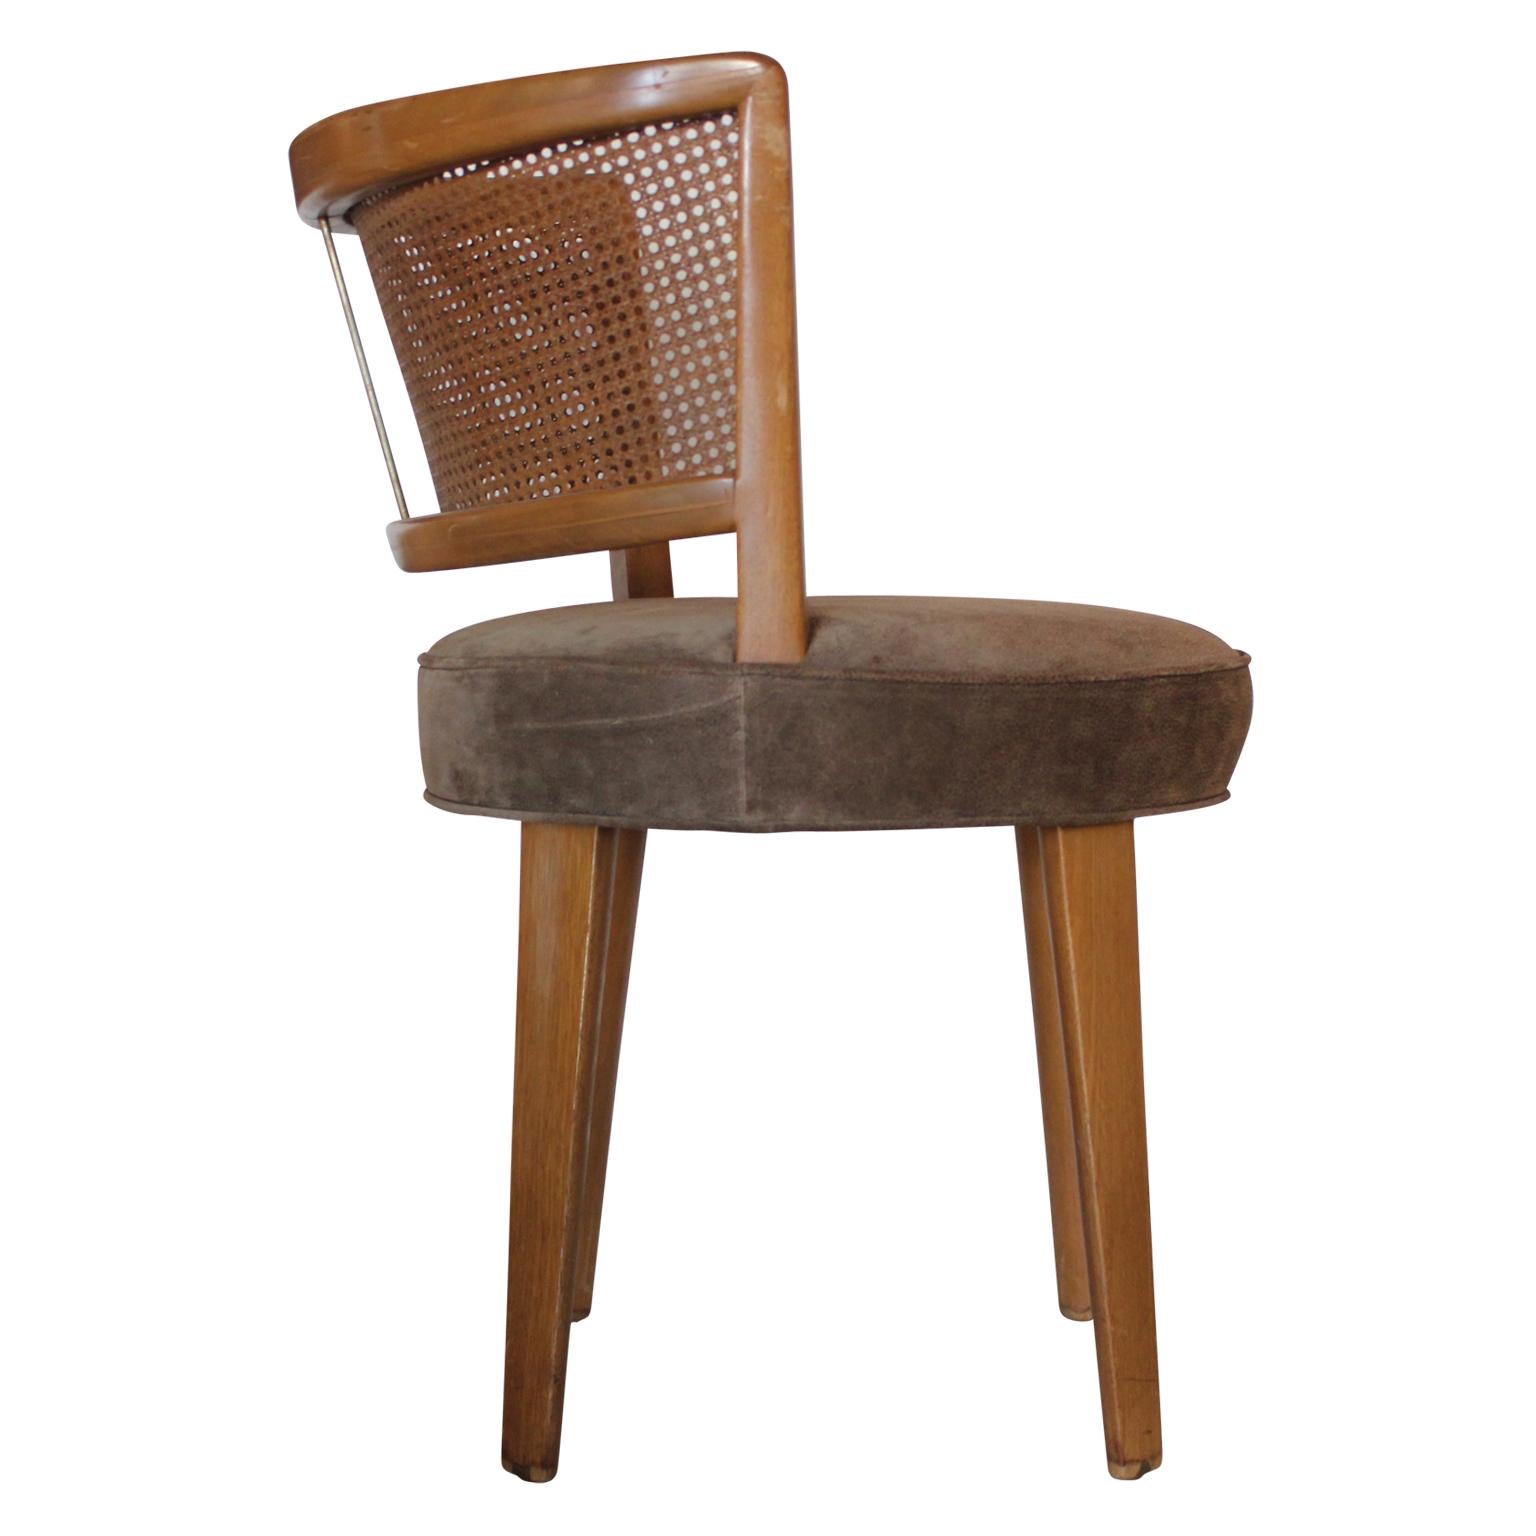 Mid-20th Century Set of Four Modern Cane Back Swivel Dining Chairs by Edward Wormley for Dunbar